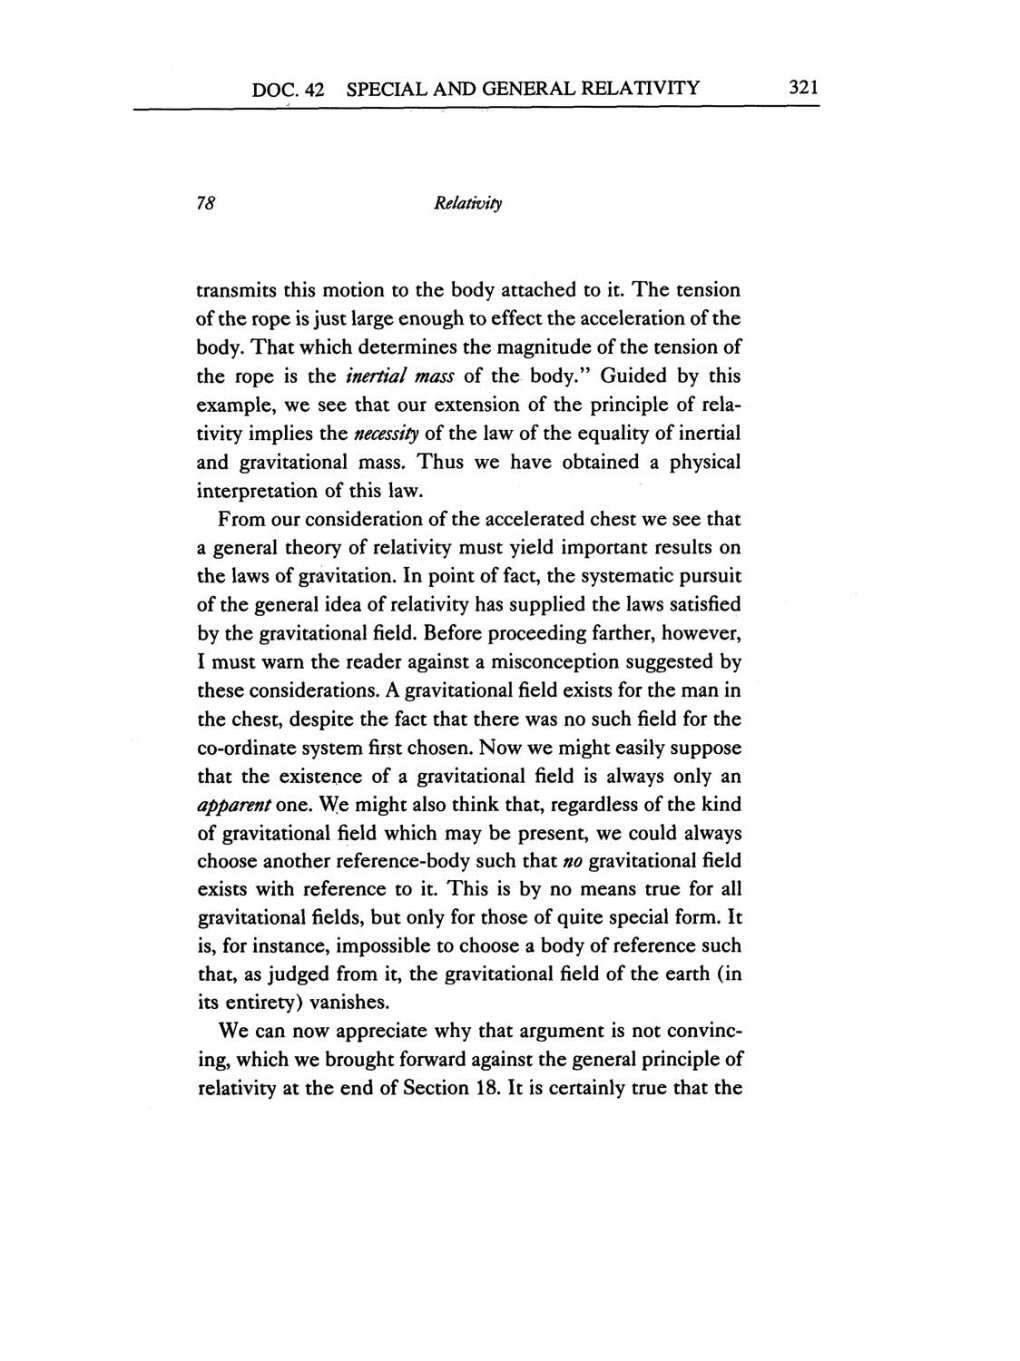 Volume 6: The Berlin Years: Writings, 1914-1917 (English translation supplement) page 321